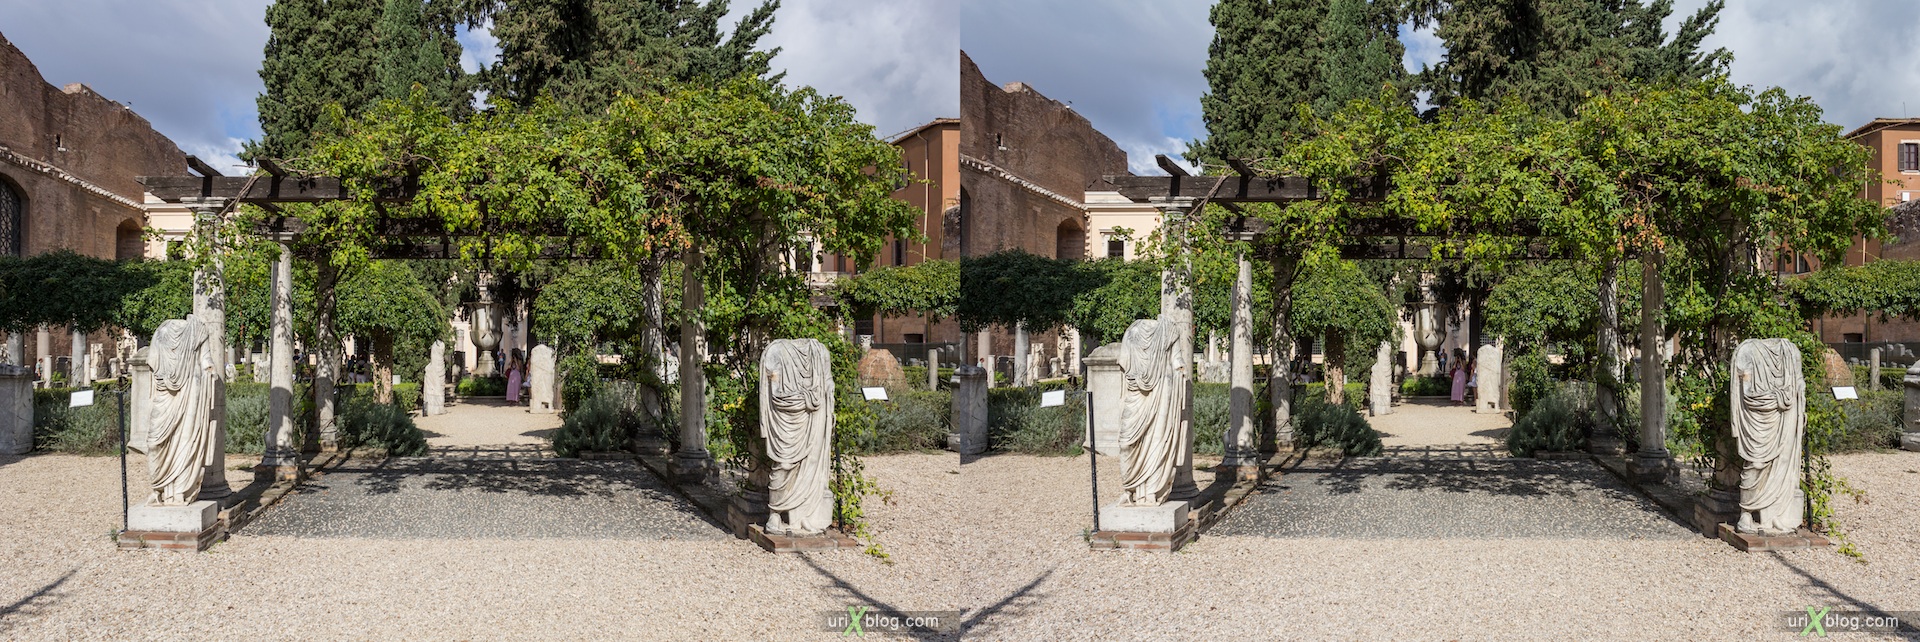 2012, National Museum of Rome, courtyard, fountain, Diocletian Baths, Rome, Italy, Europe, 3D, stereo pair, cross-eyed, crossview, cross view stereo pair